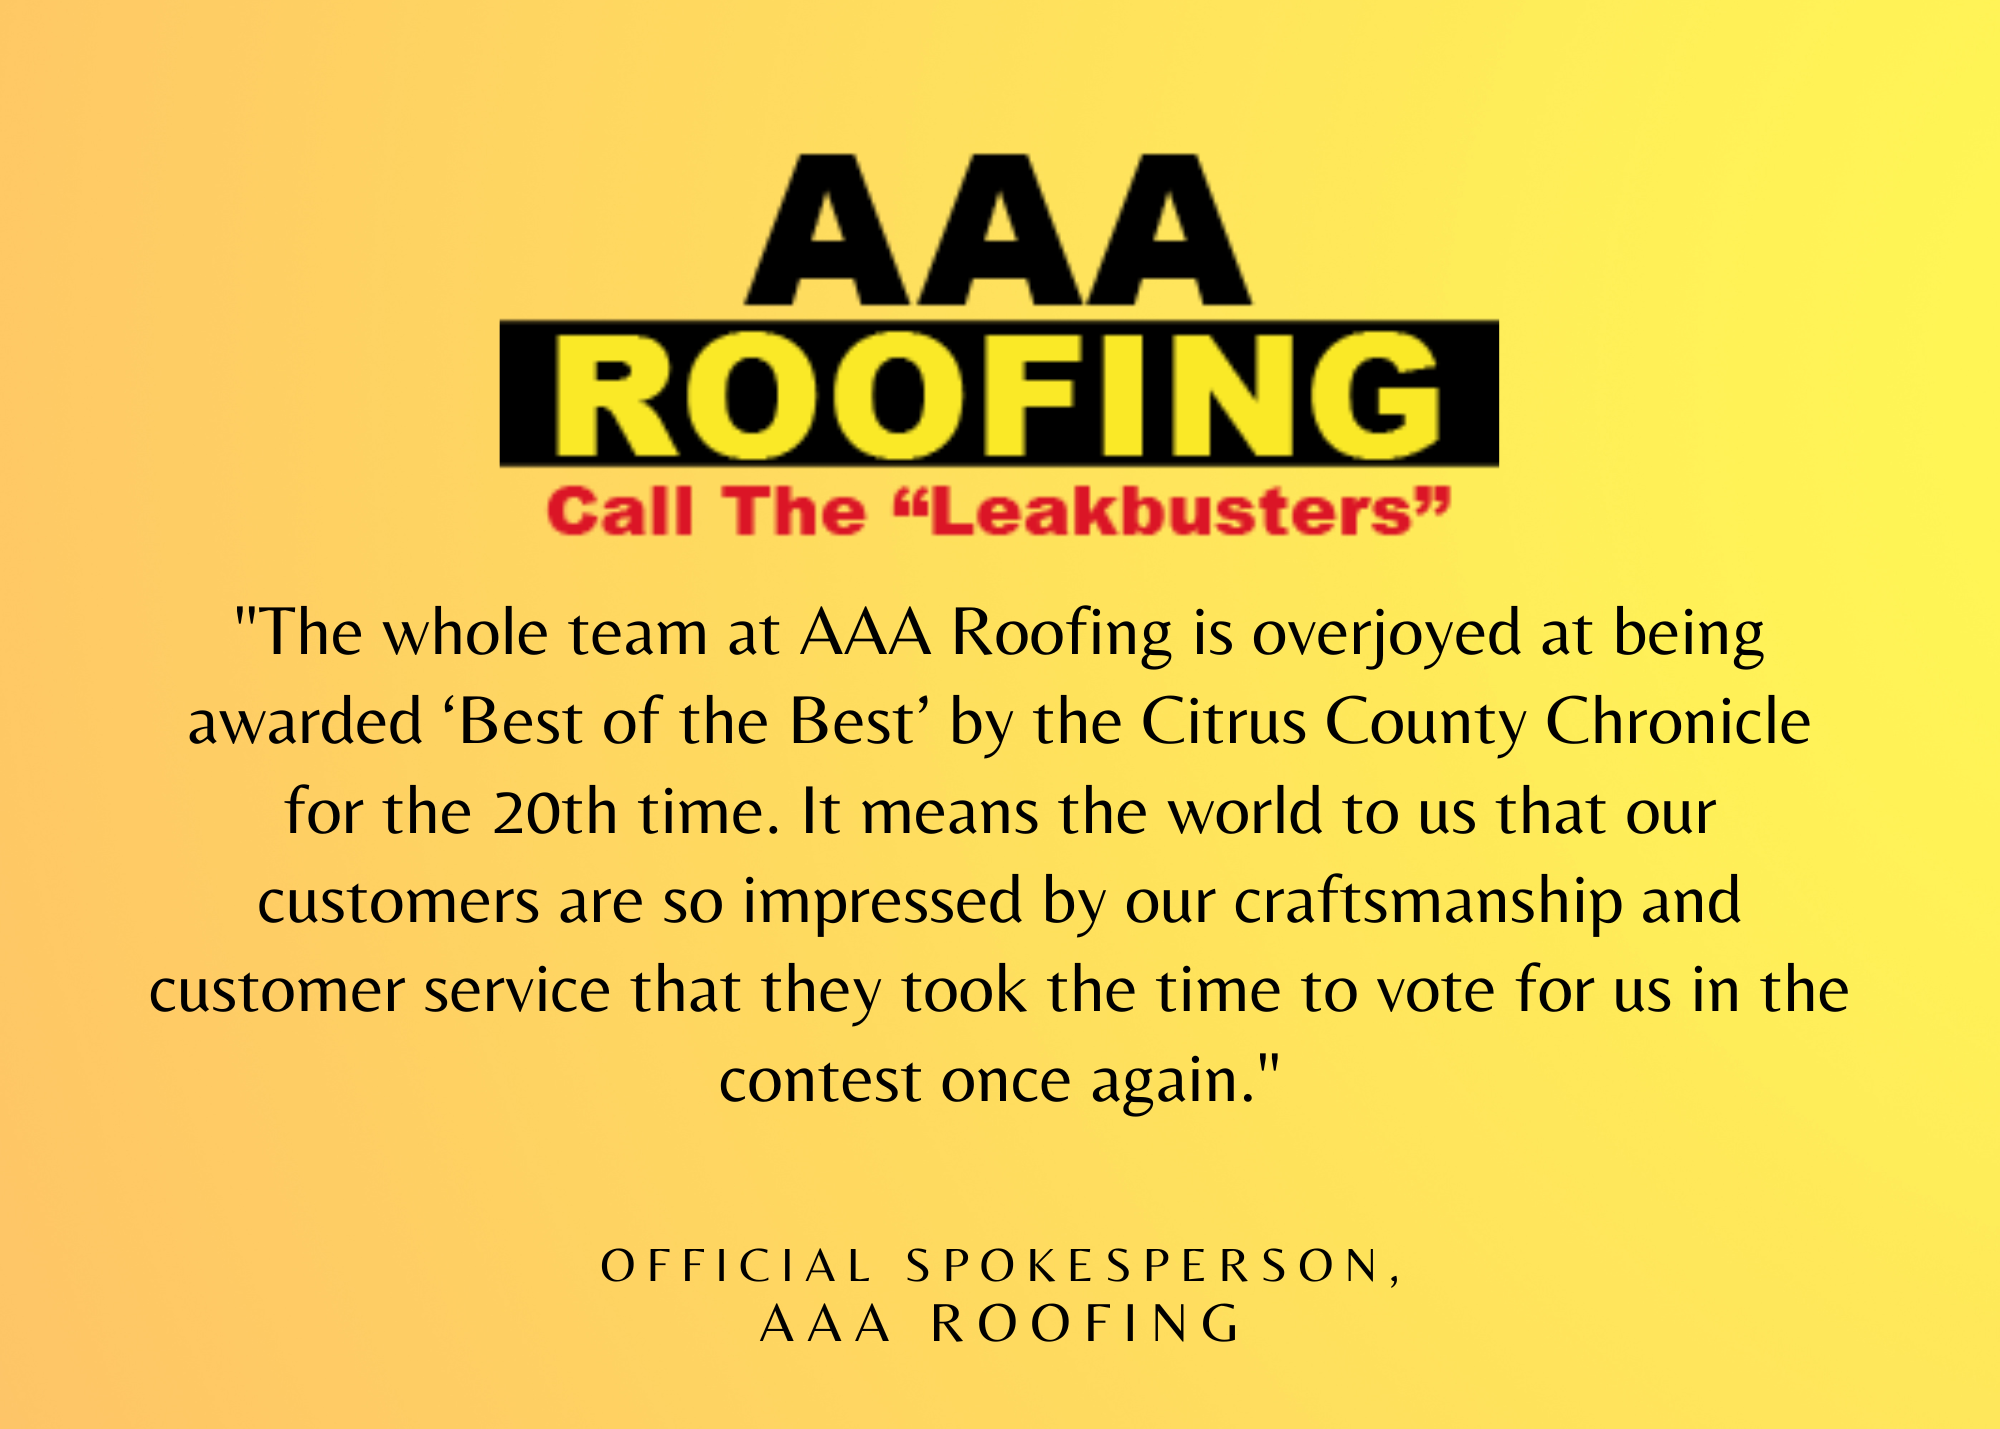 AAA Roofing is Named ‘Best of the Best’ by the Citrus County Chronicle for the 20th Time